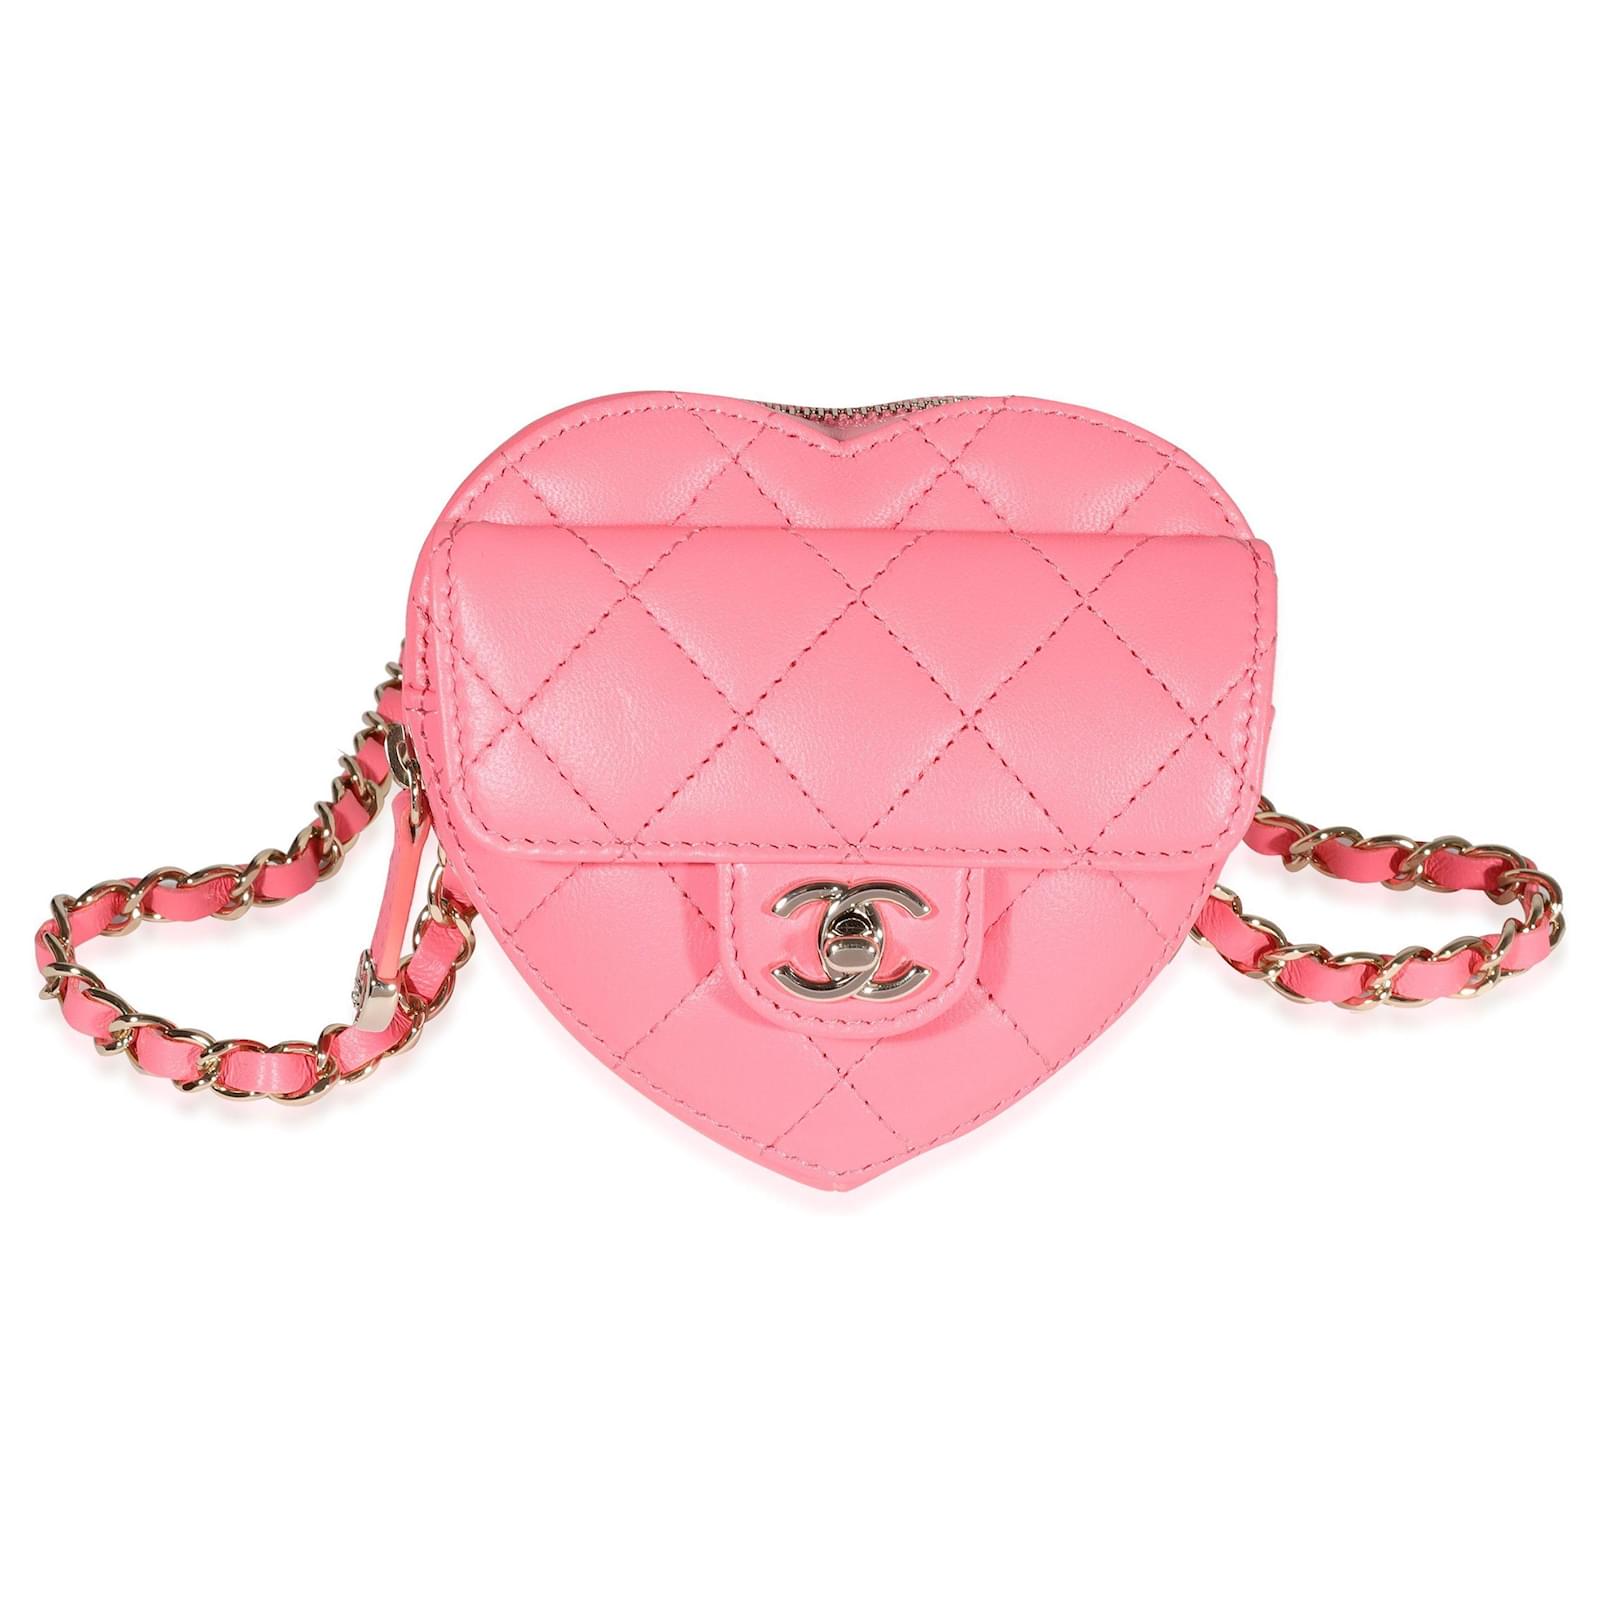 CHANEL PINK CAVIAR WAIST BELT BUM BAG TRAVEL FANNY PACK New Made in Italy   eBay